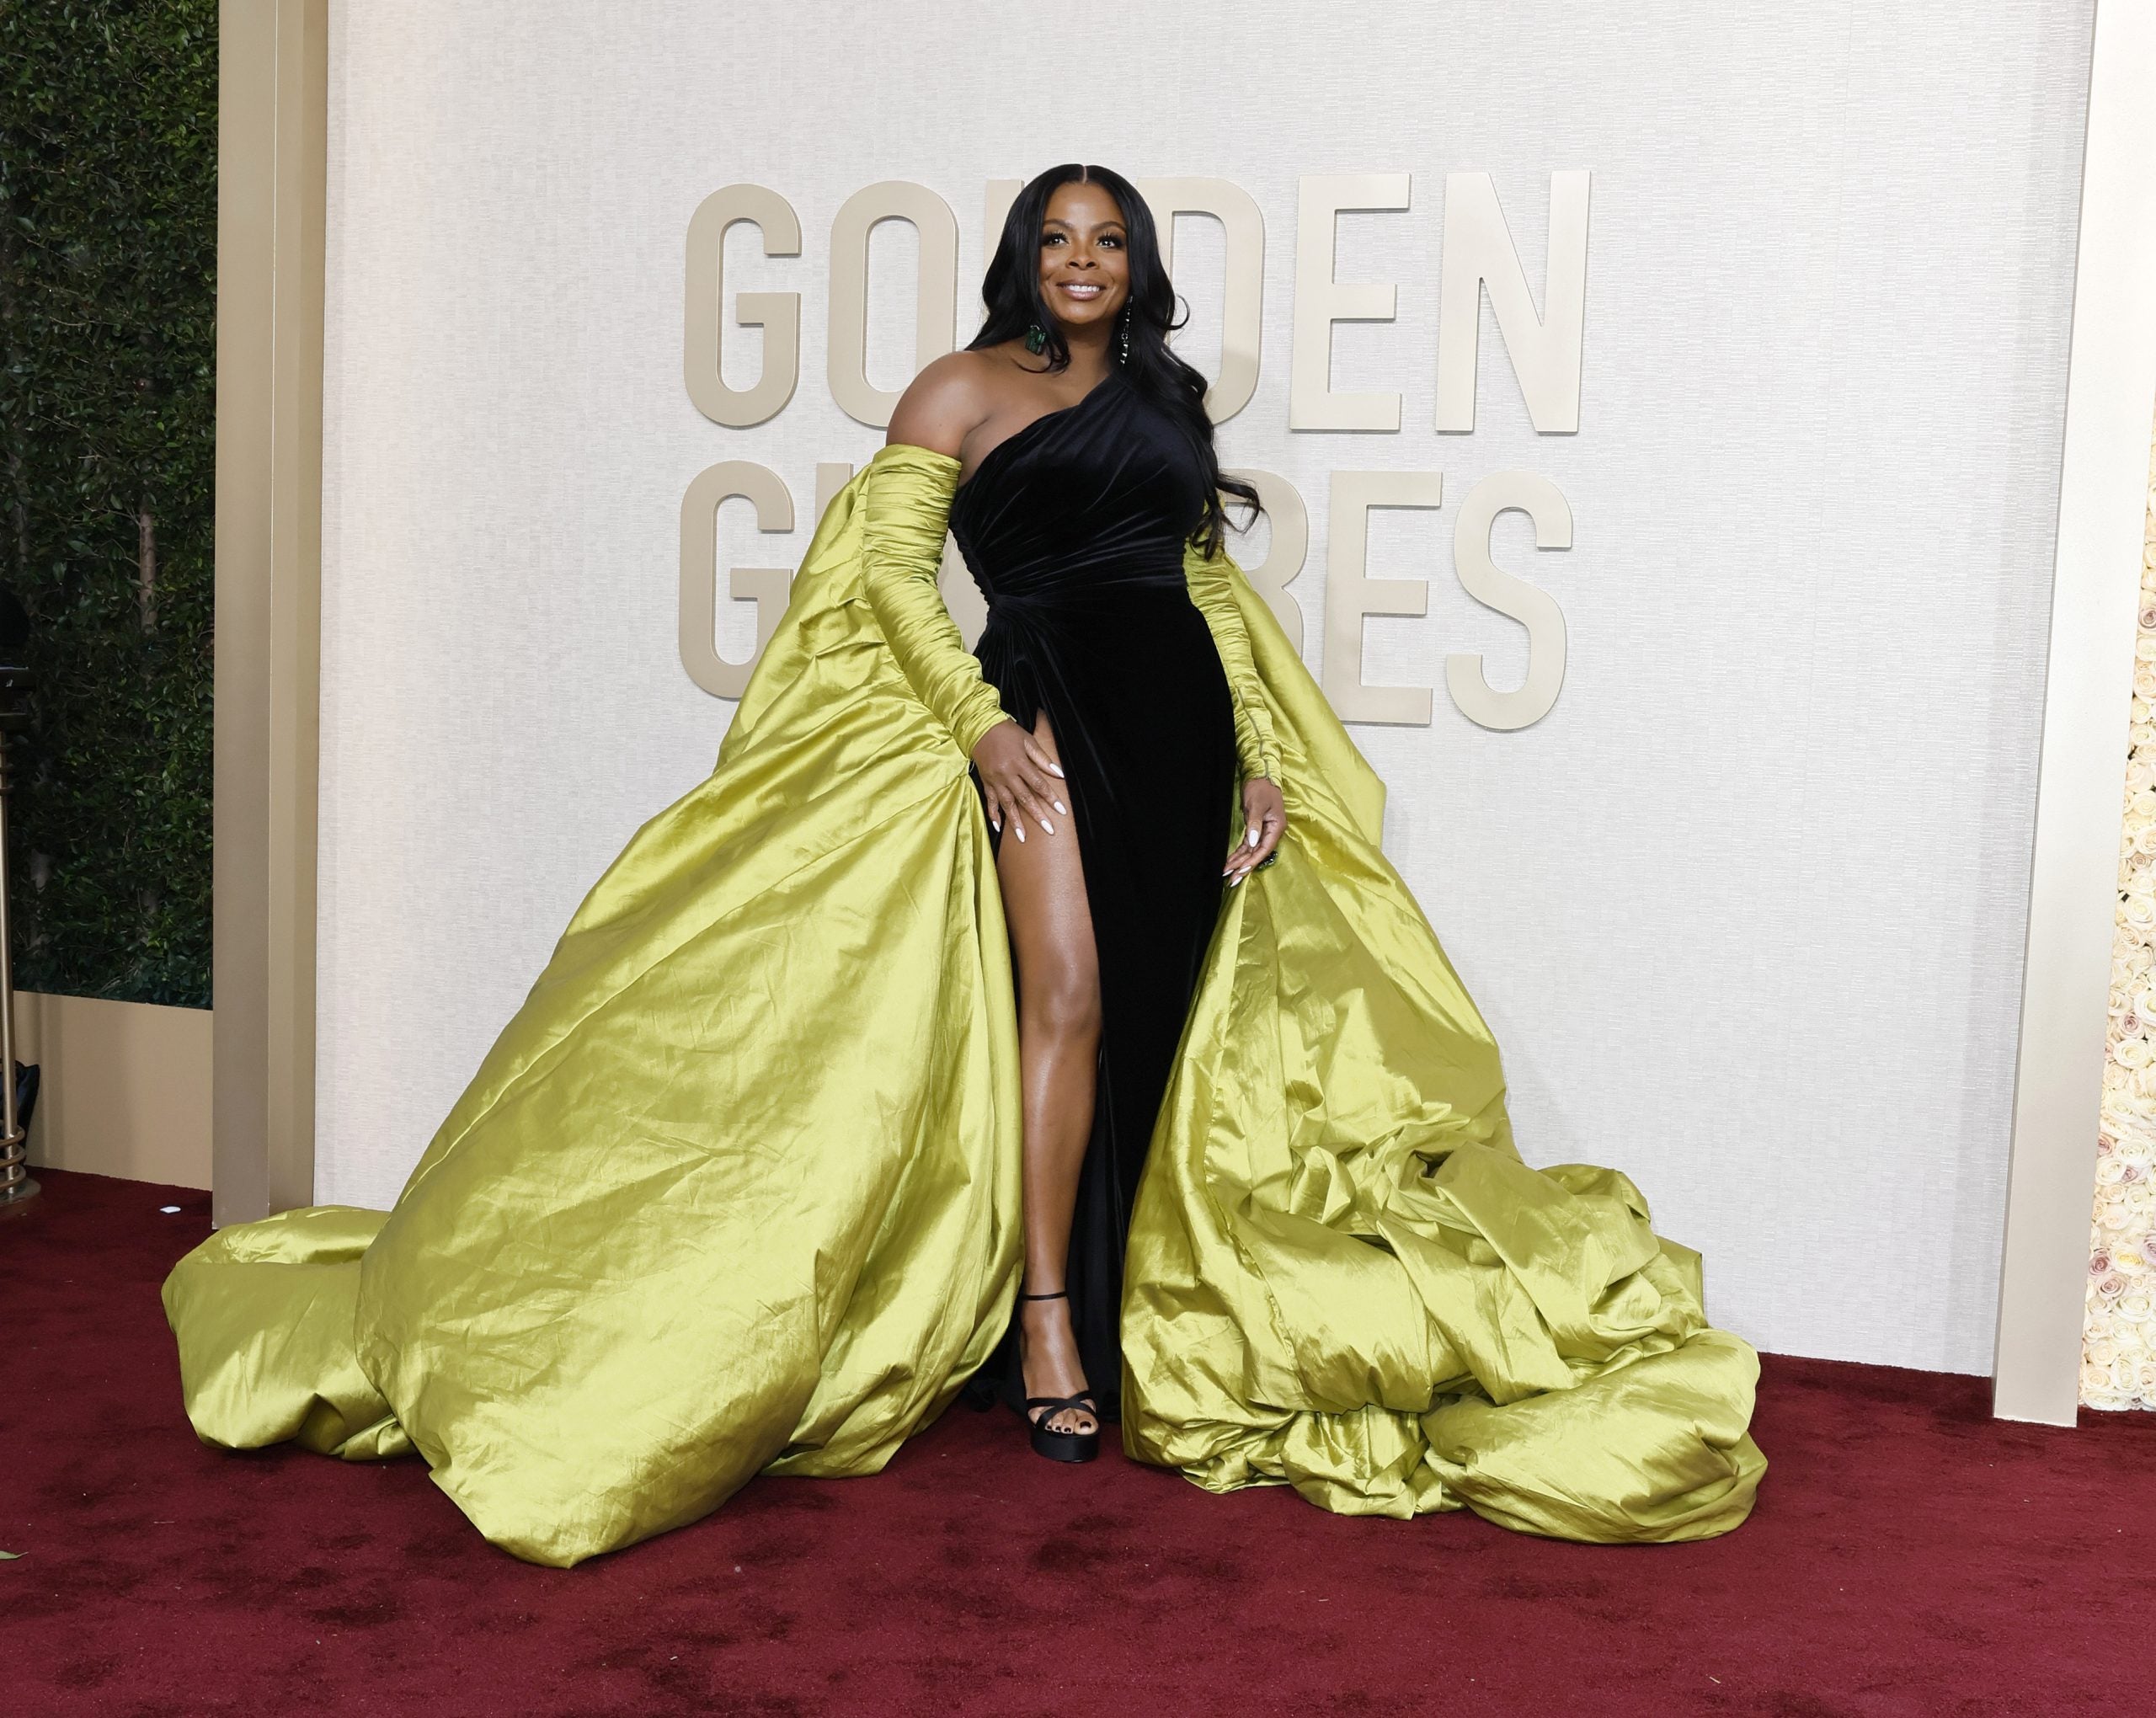 Can We Get Some Commotion For Janelle James’ Golden Globes Gown?